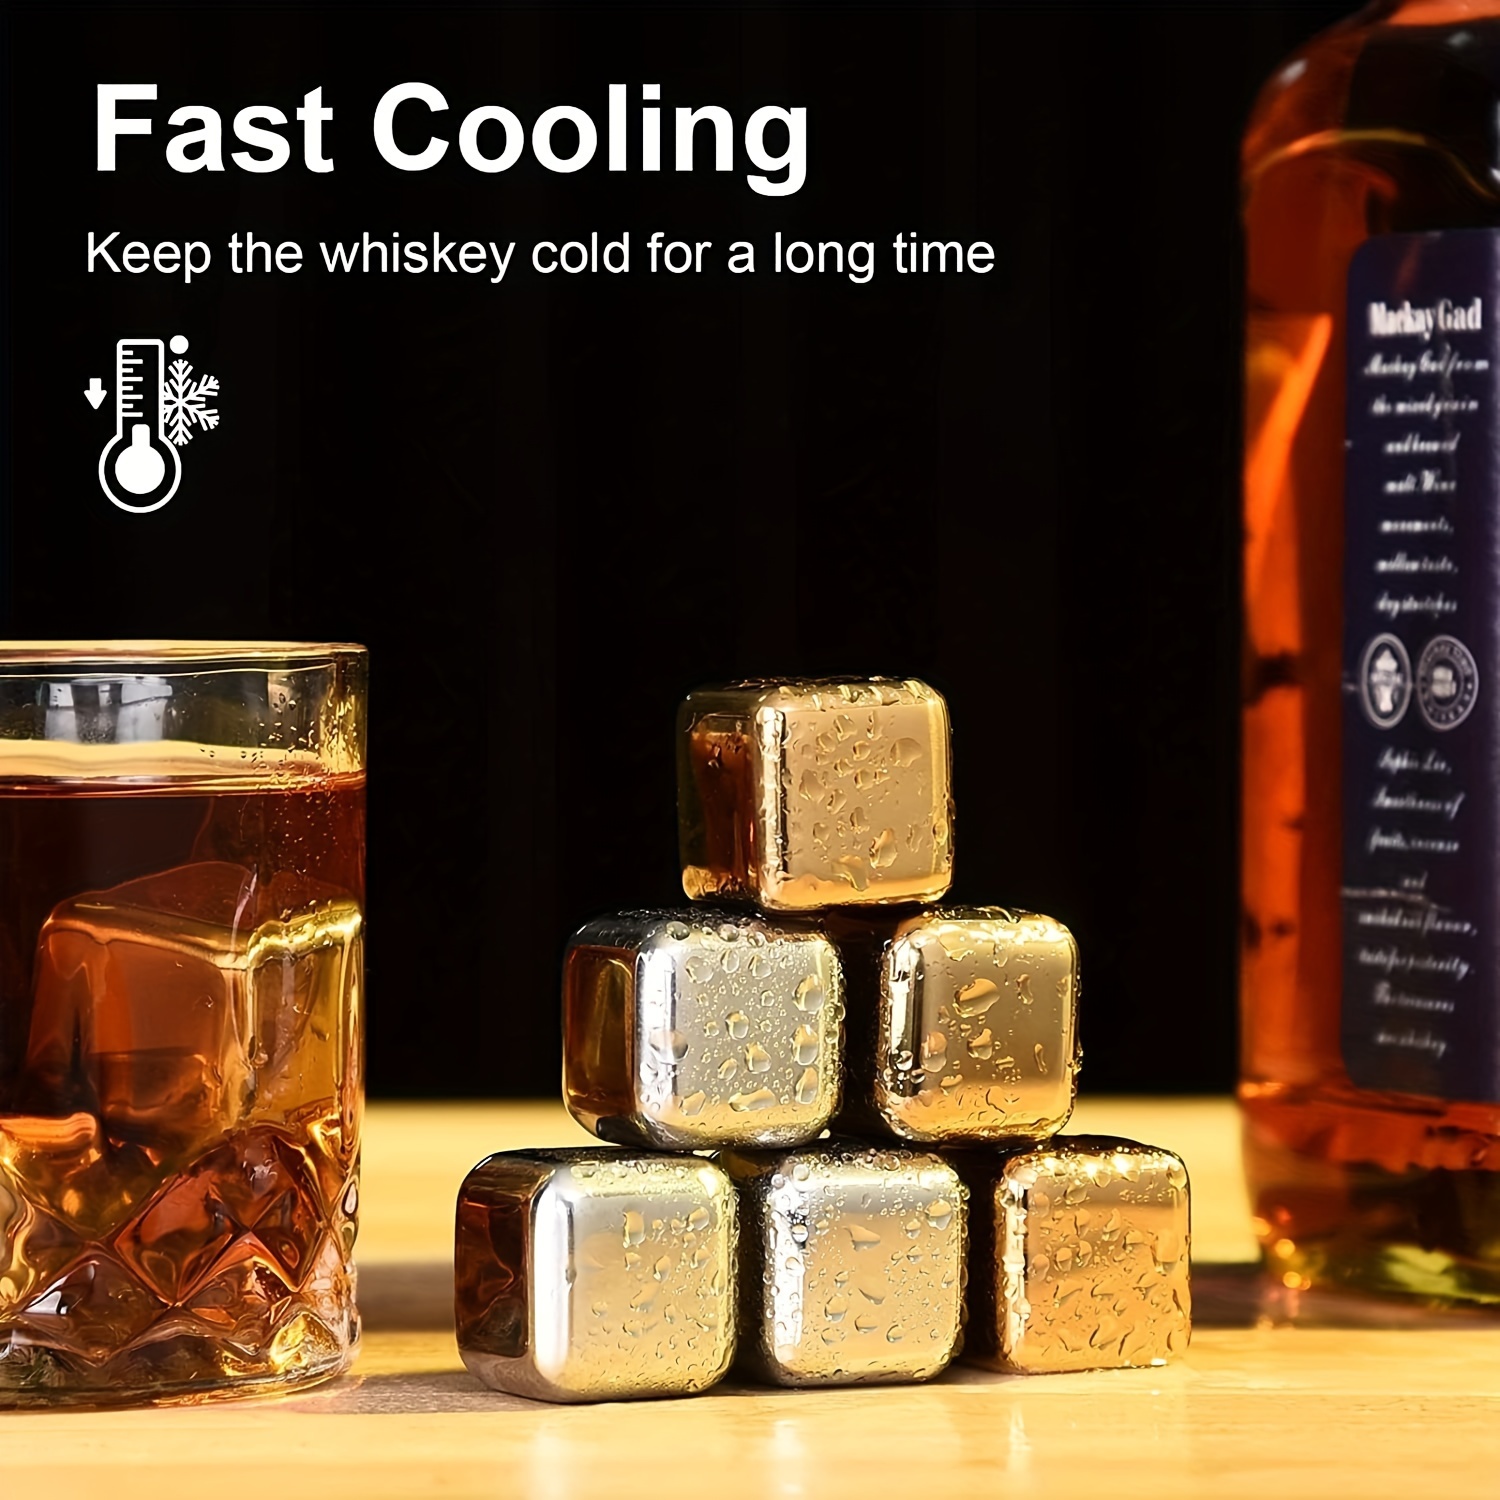 Stainless Steel Ice Cube, Reusable Chilling Whiskey Stones